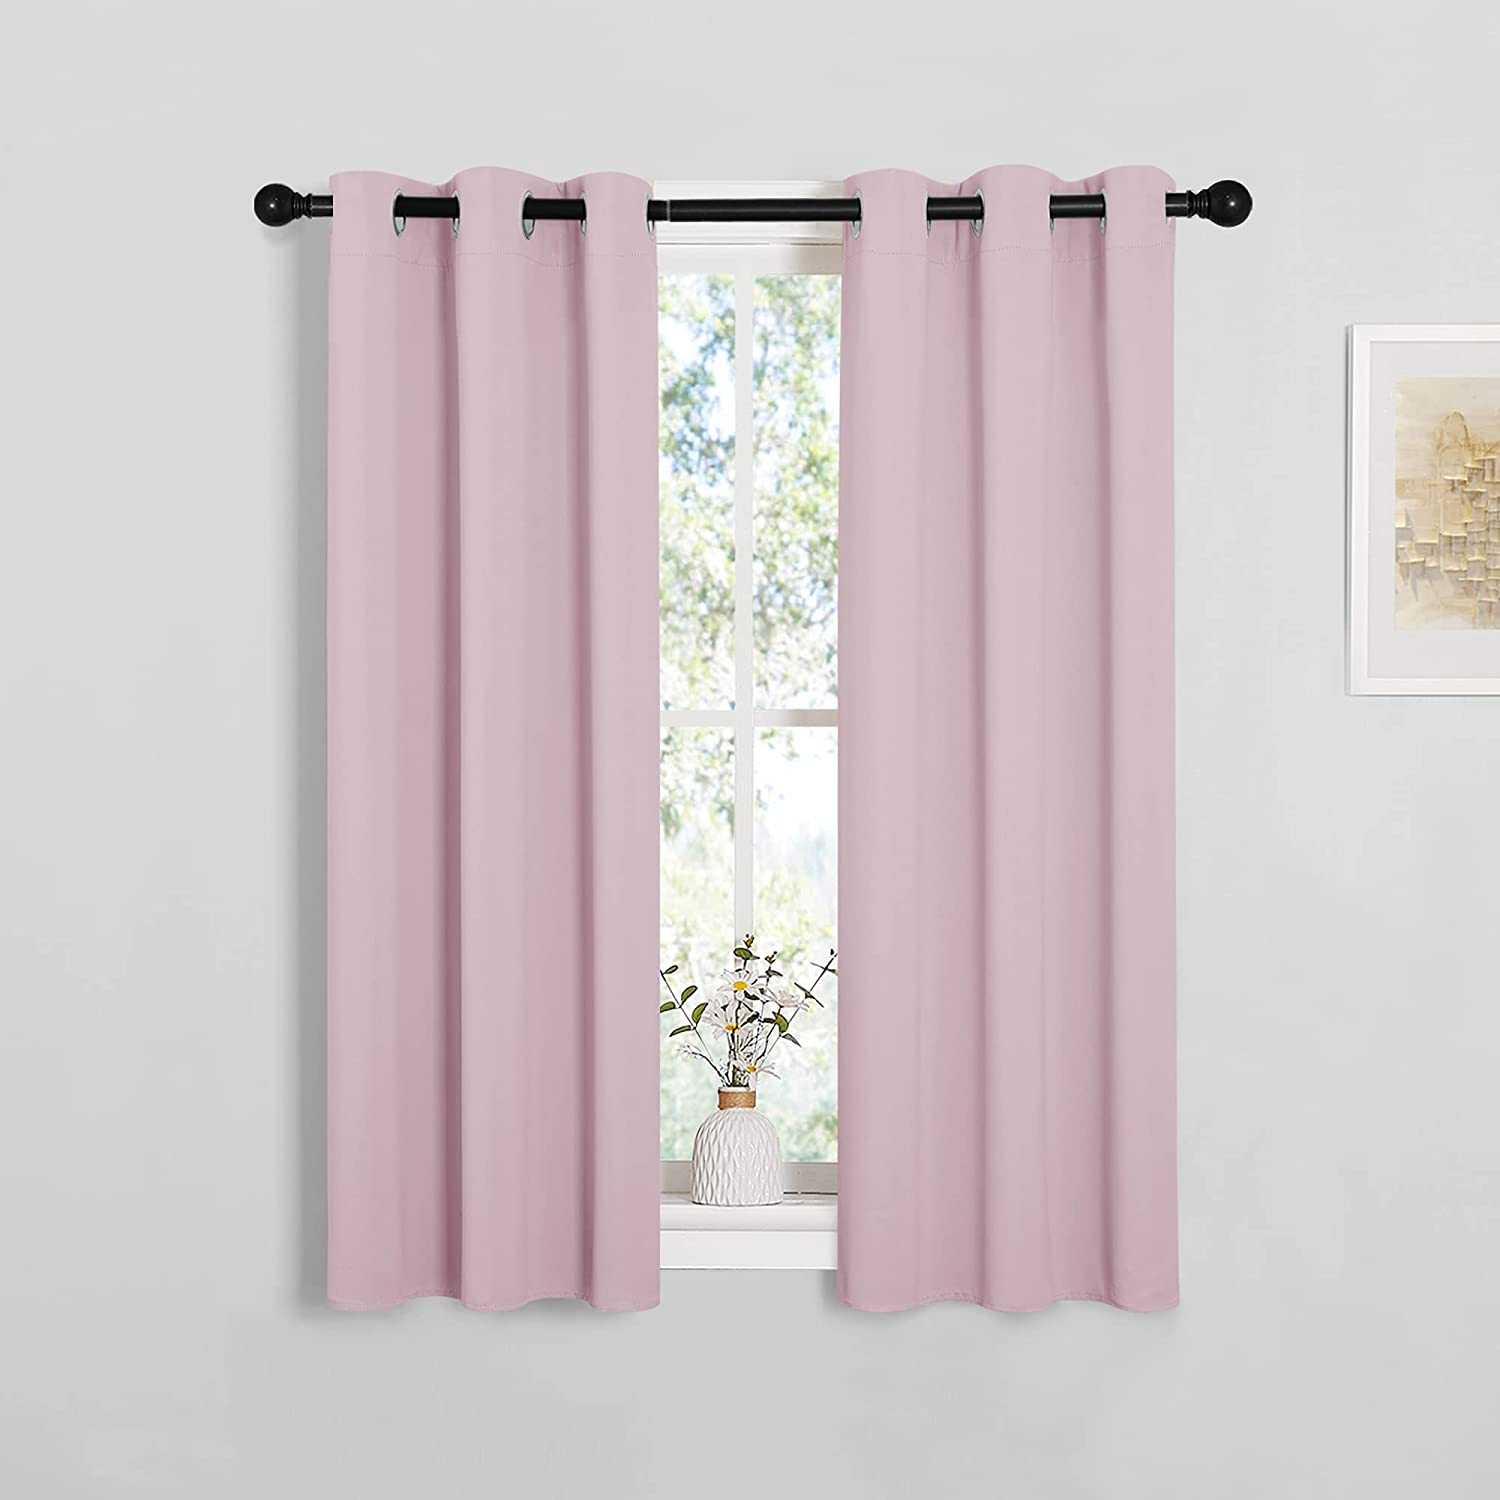 Blackout Curtain Panels for Girls Room, Nursery Essential Thermal Insulated Solid Grommet Top Blackout Drapes (Baby Pink=Lavender Pink, 1 Pair, 29 X 45 Inch)